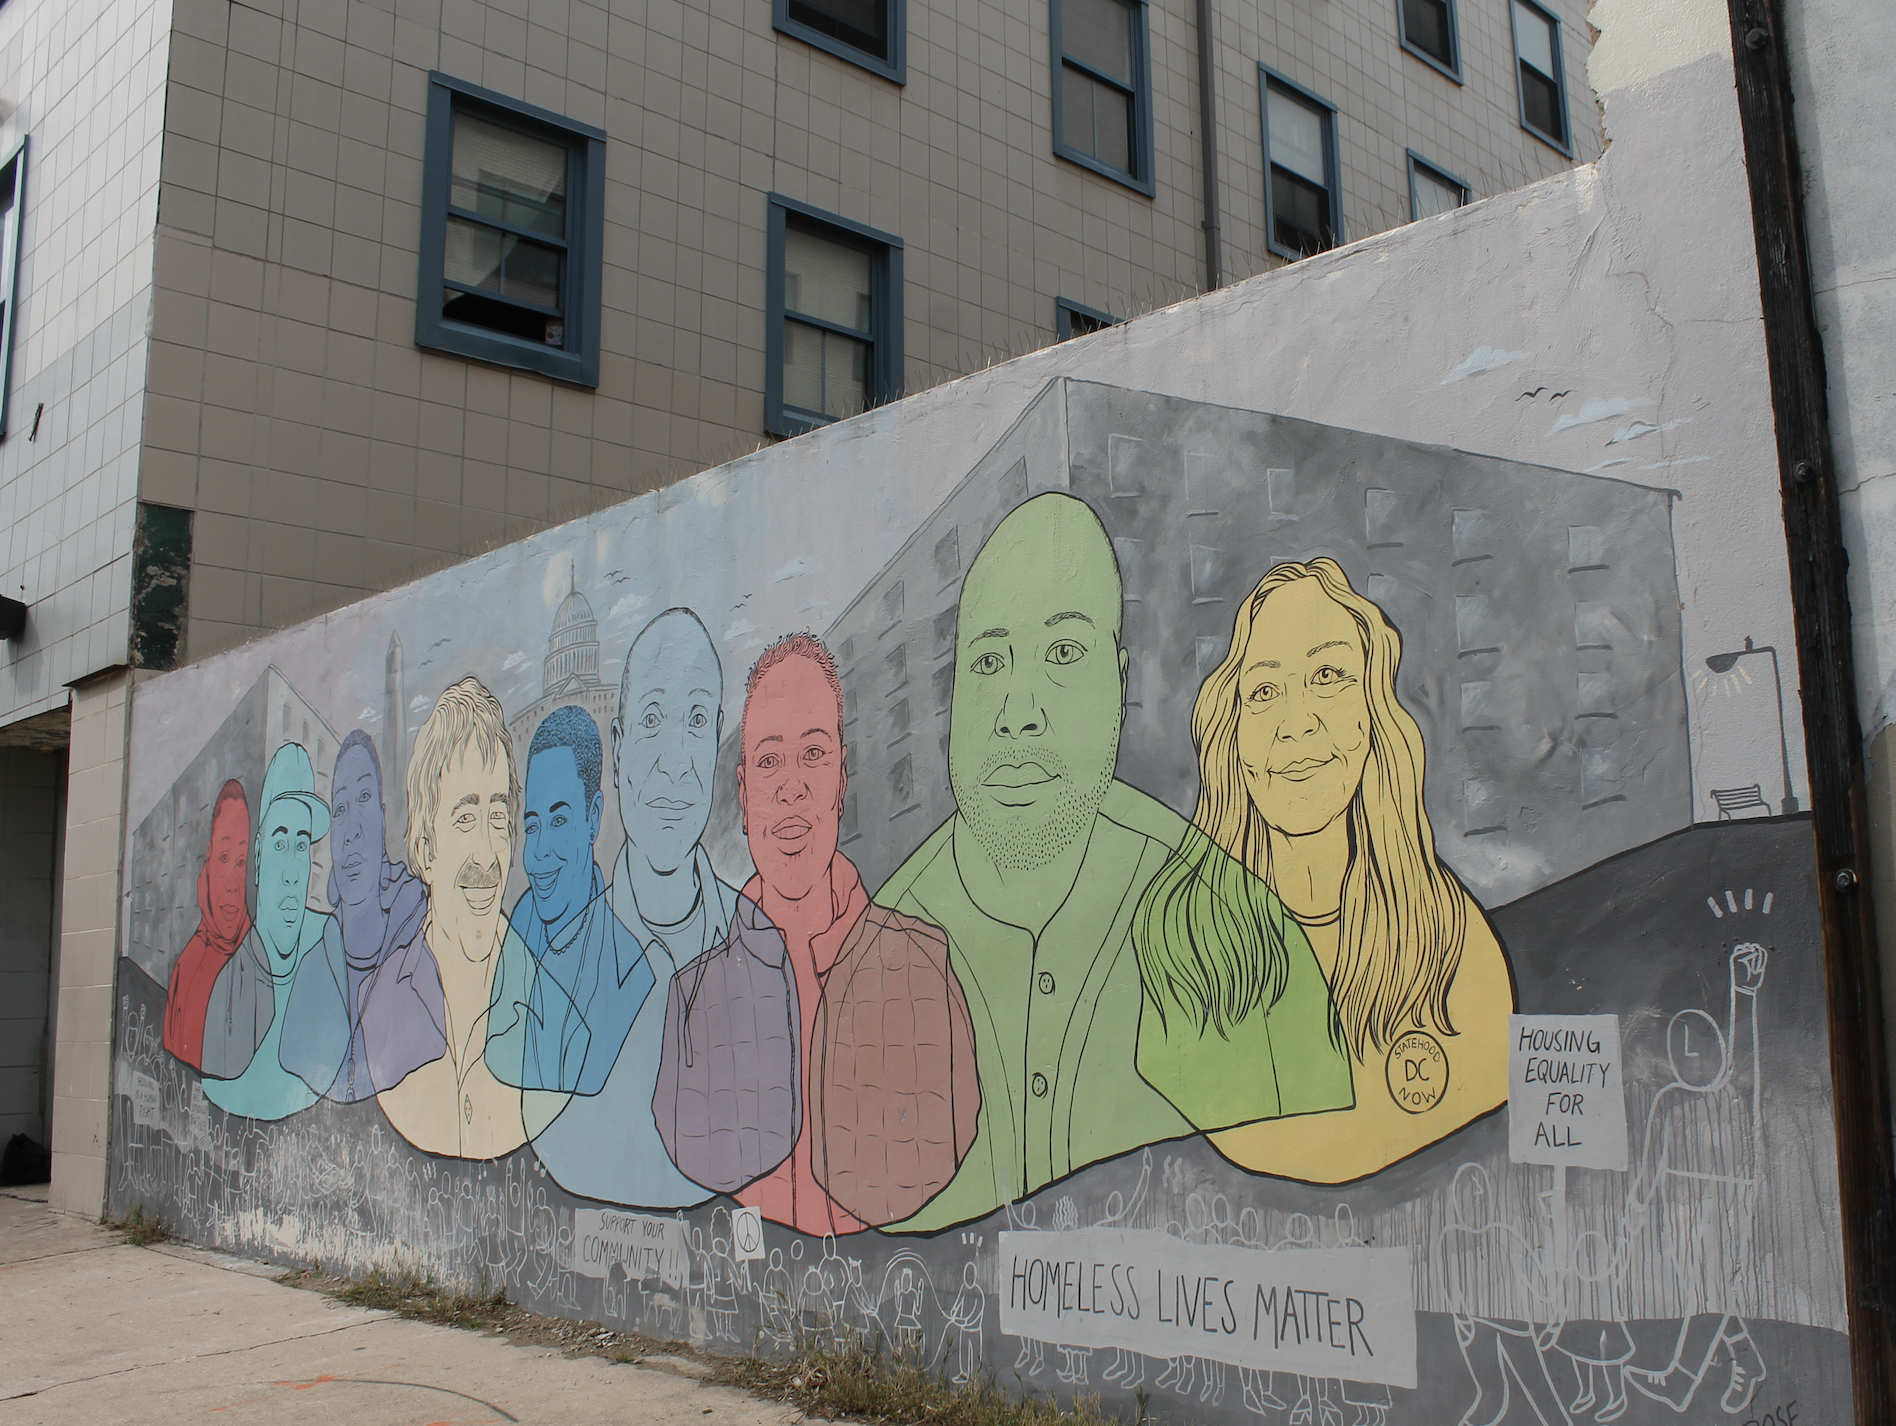 Photo shows the homeless lives matter mural at CCNV, with colorful faces